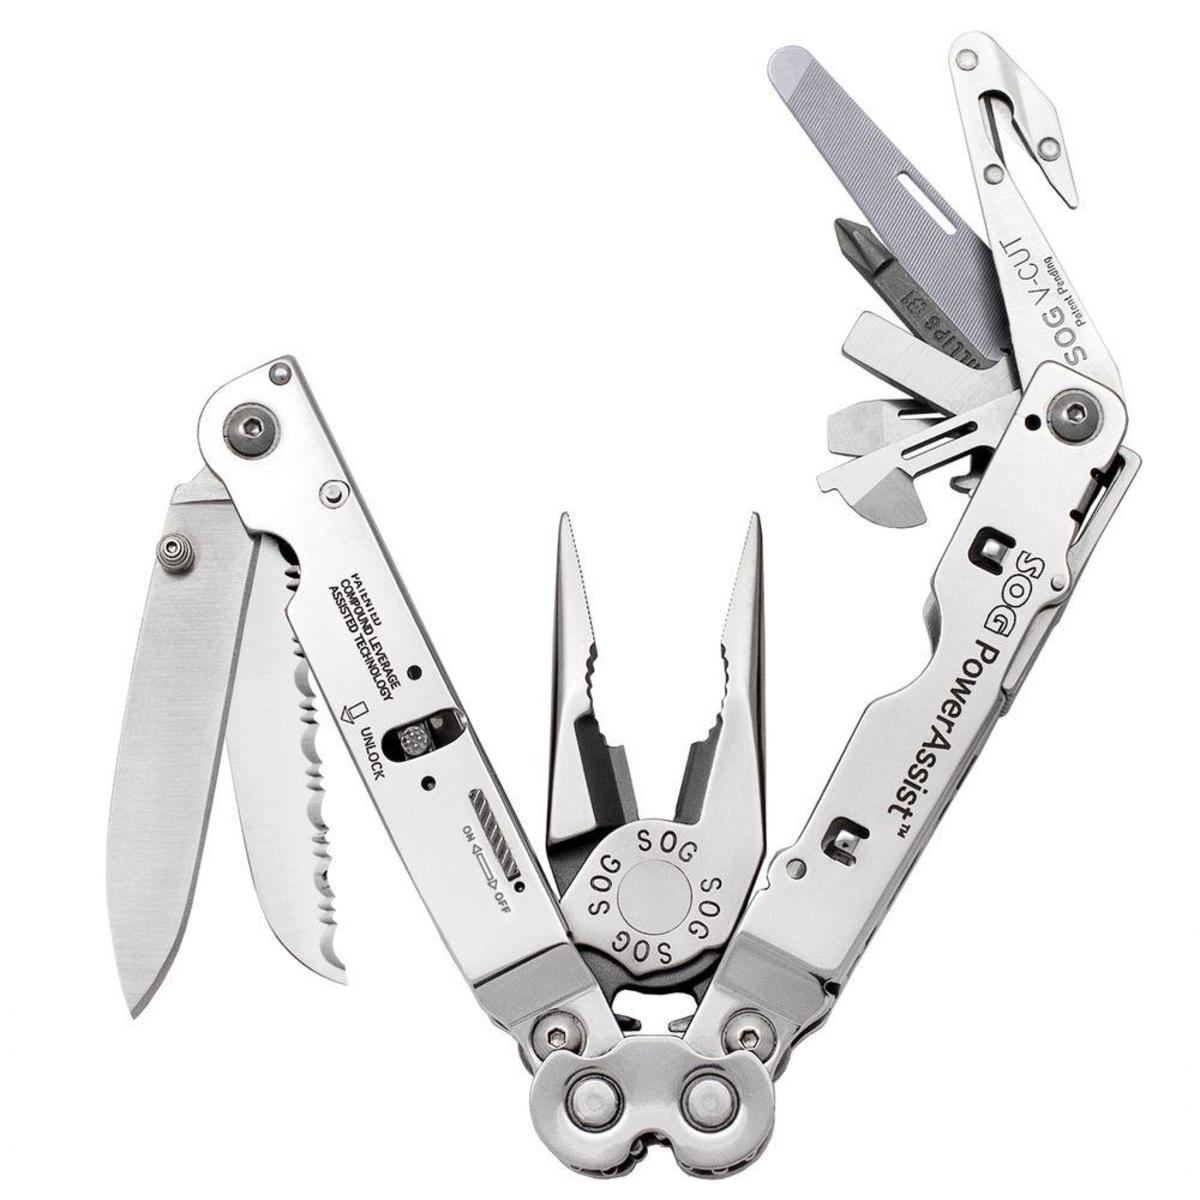 SOG PowerAssist Multi-Tool: Southpaw Approved